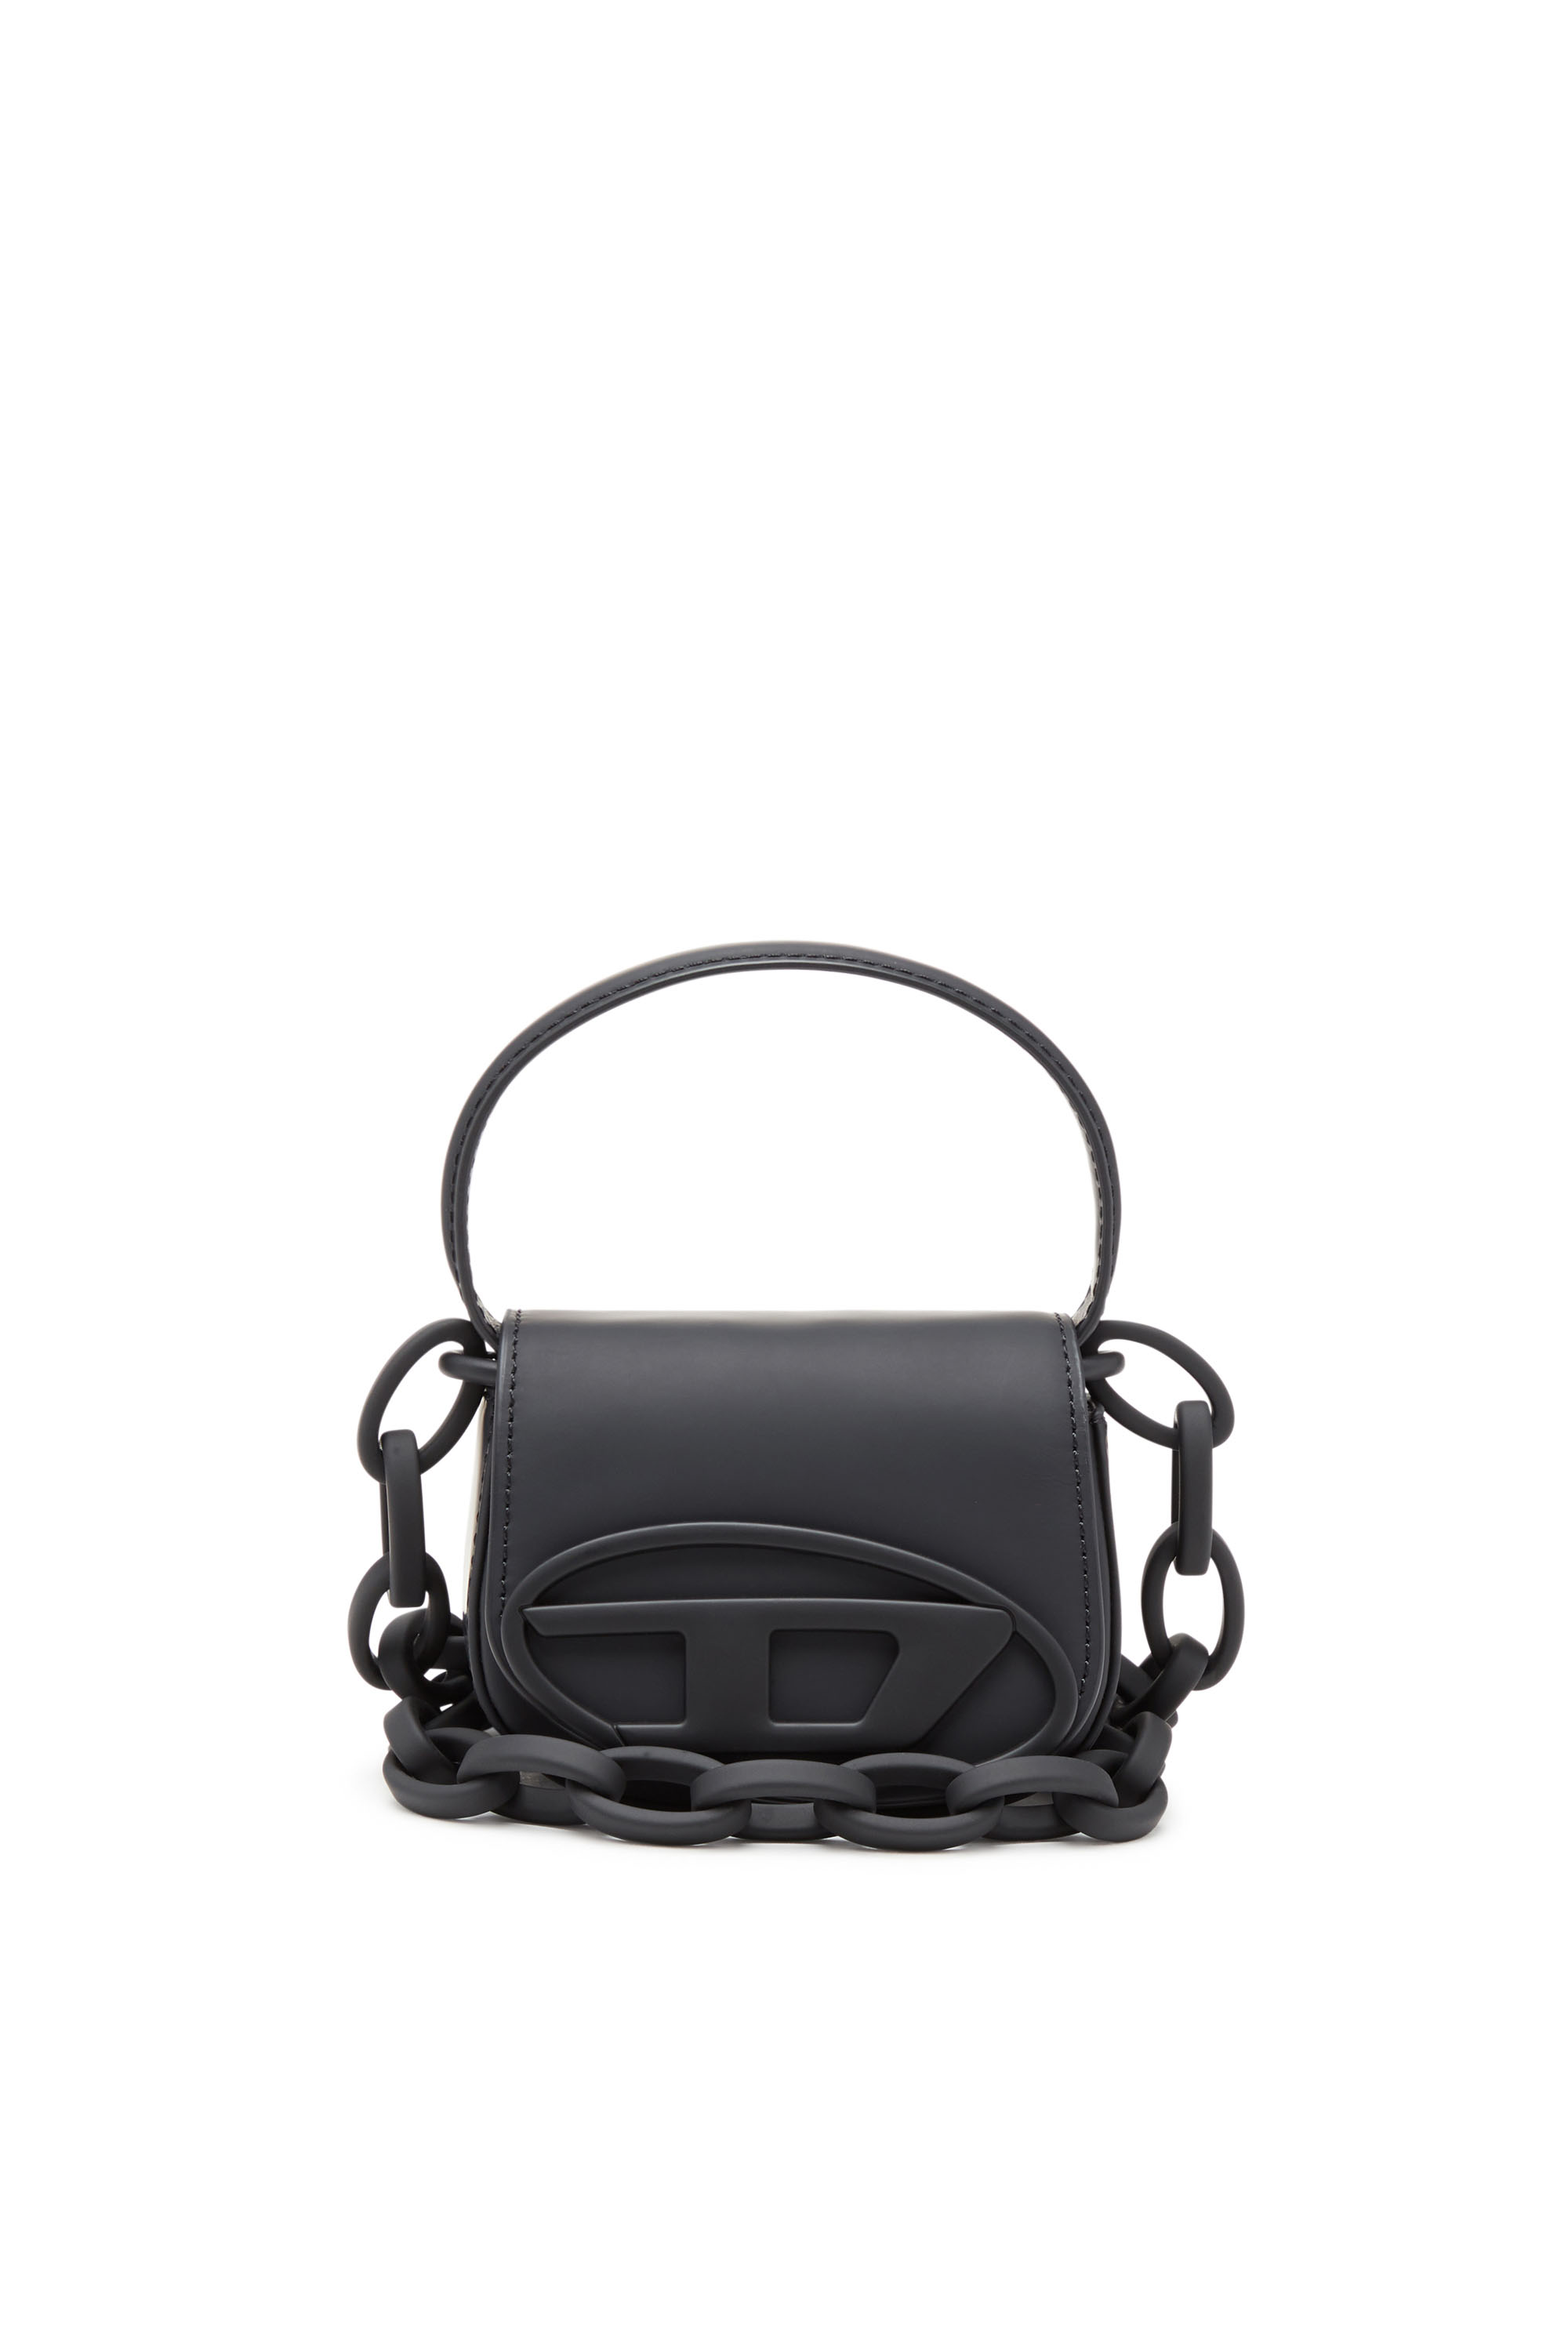 Diesel - 1DR XS, Female 1DR Xs-Iconic mini bag in matte leather in ブラック - Image 1